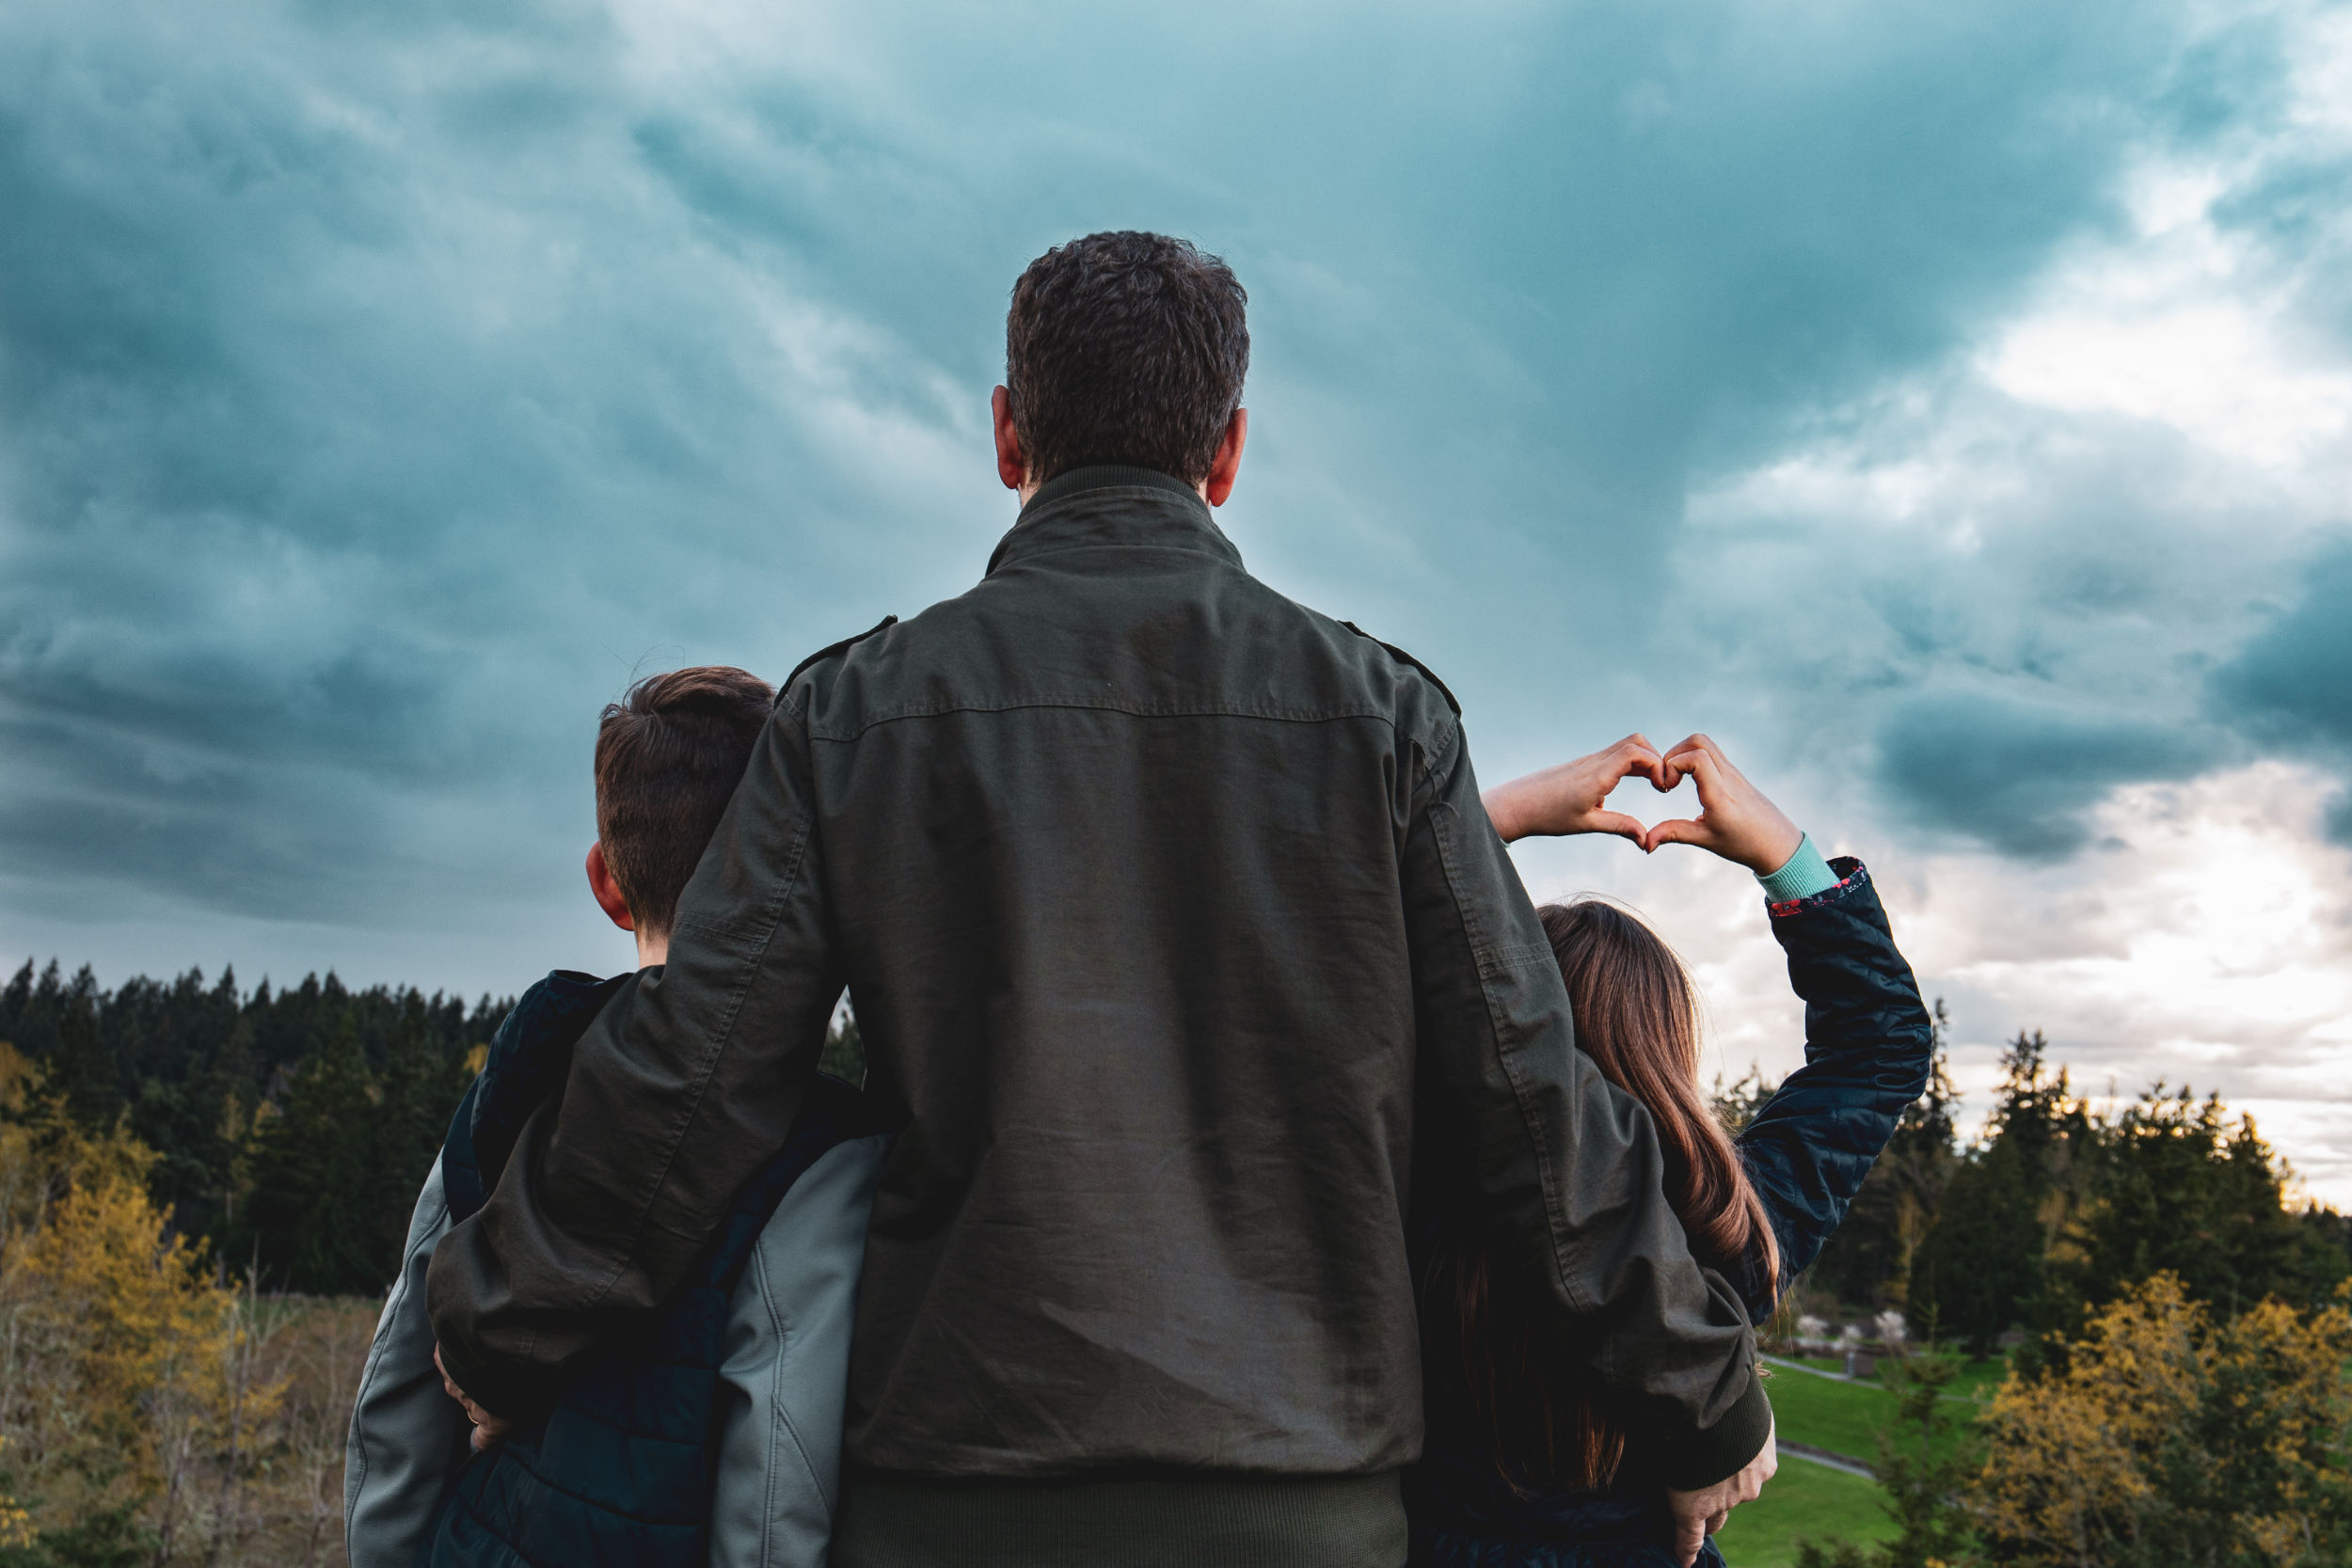 a family with adult and two kids stands looking out at a cloudy day on the commons, one child holding their hands up in a heart shape